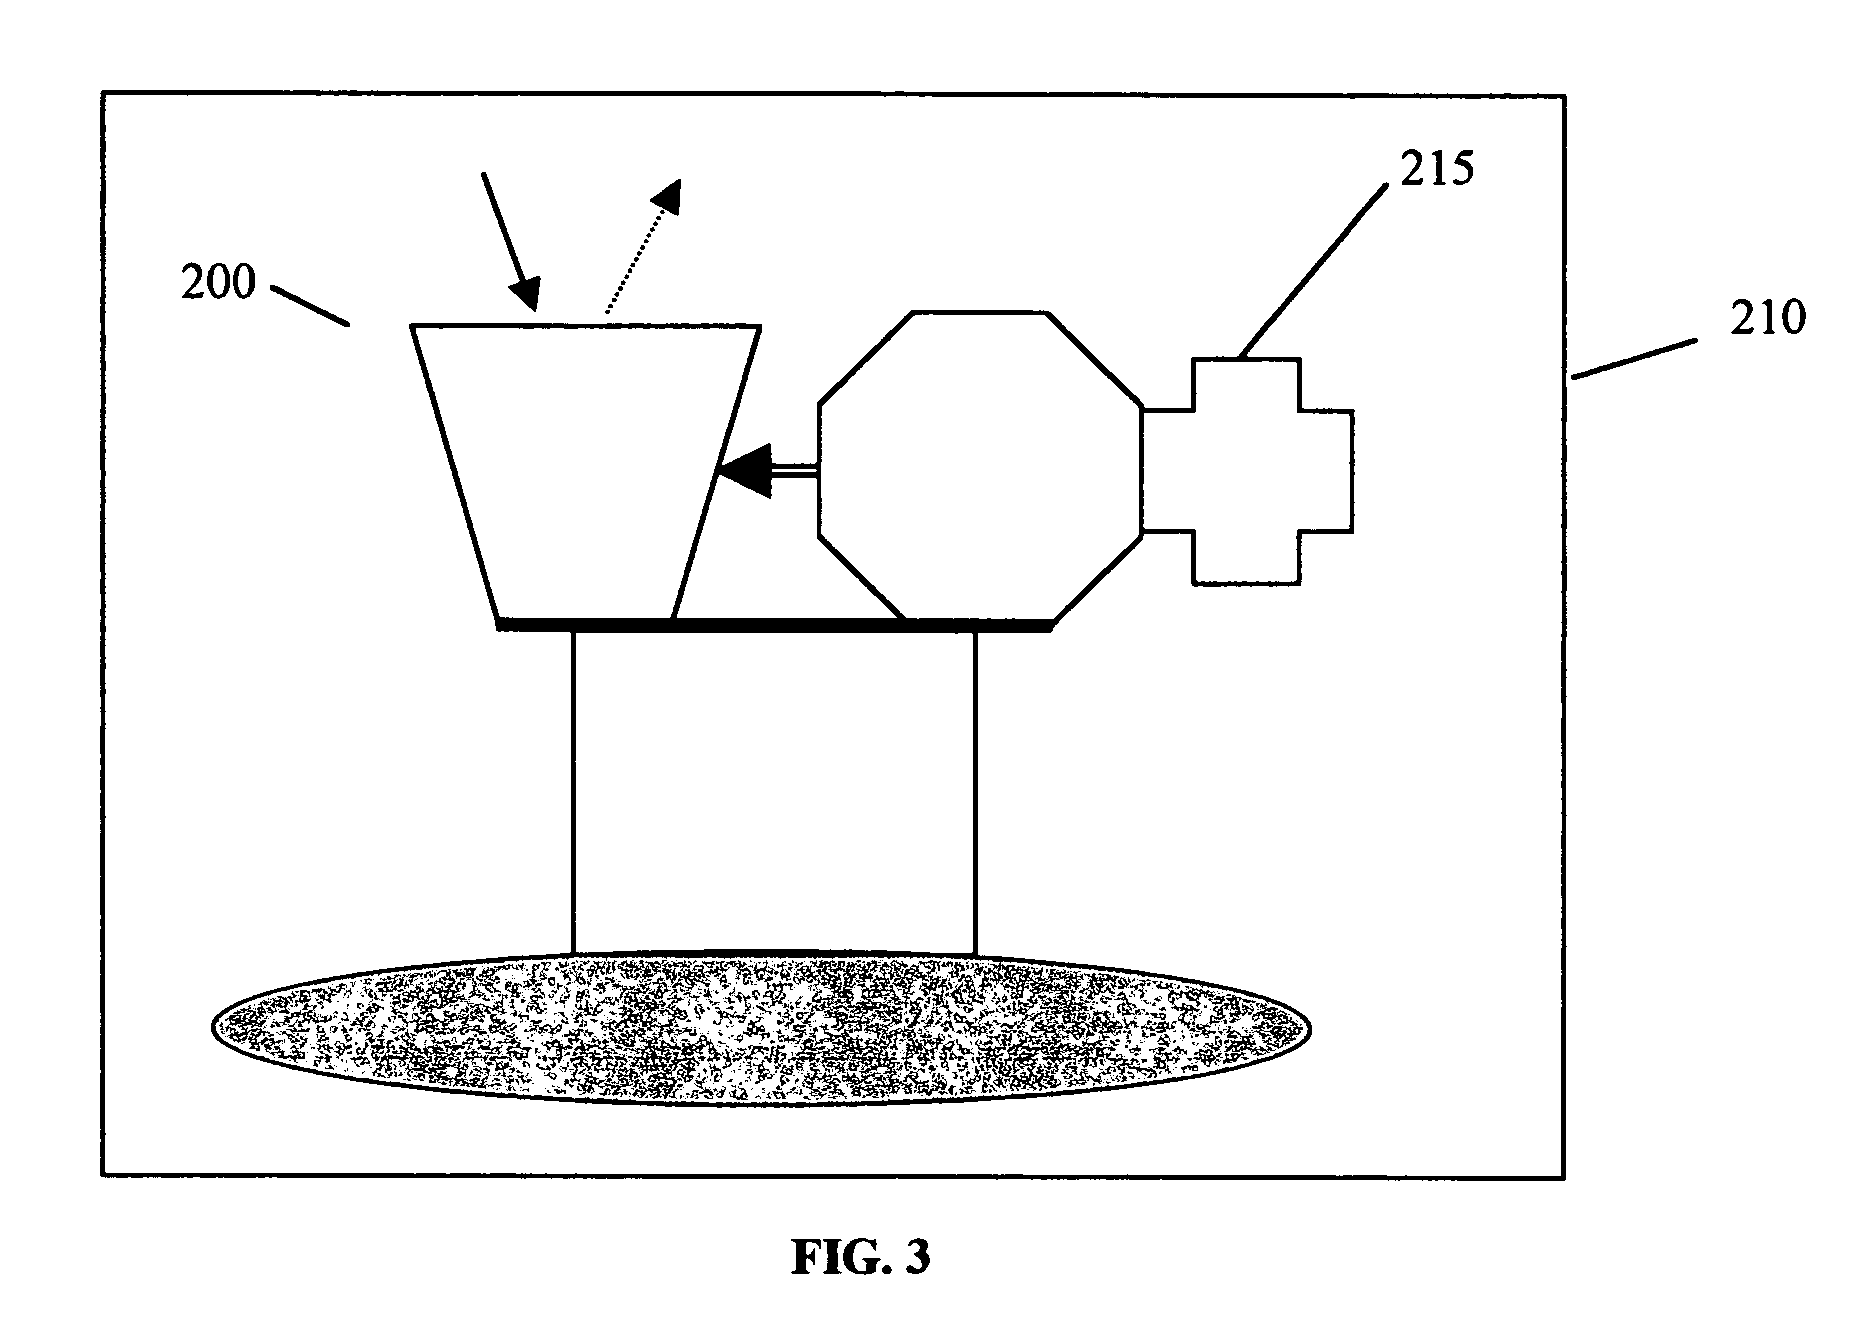 Apparatus and method for noninvasive monitoring of analytes in body fluids